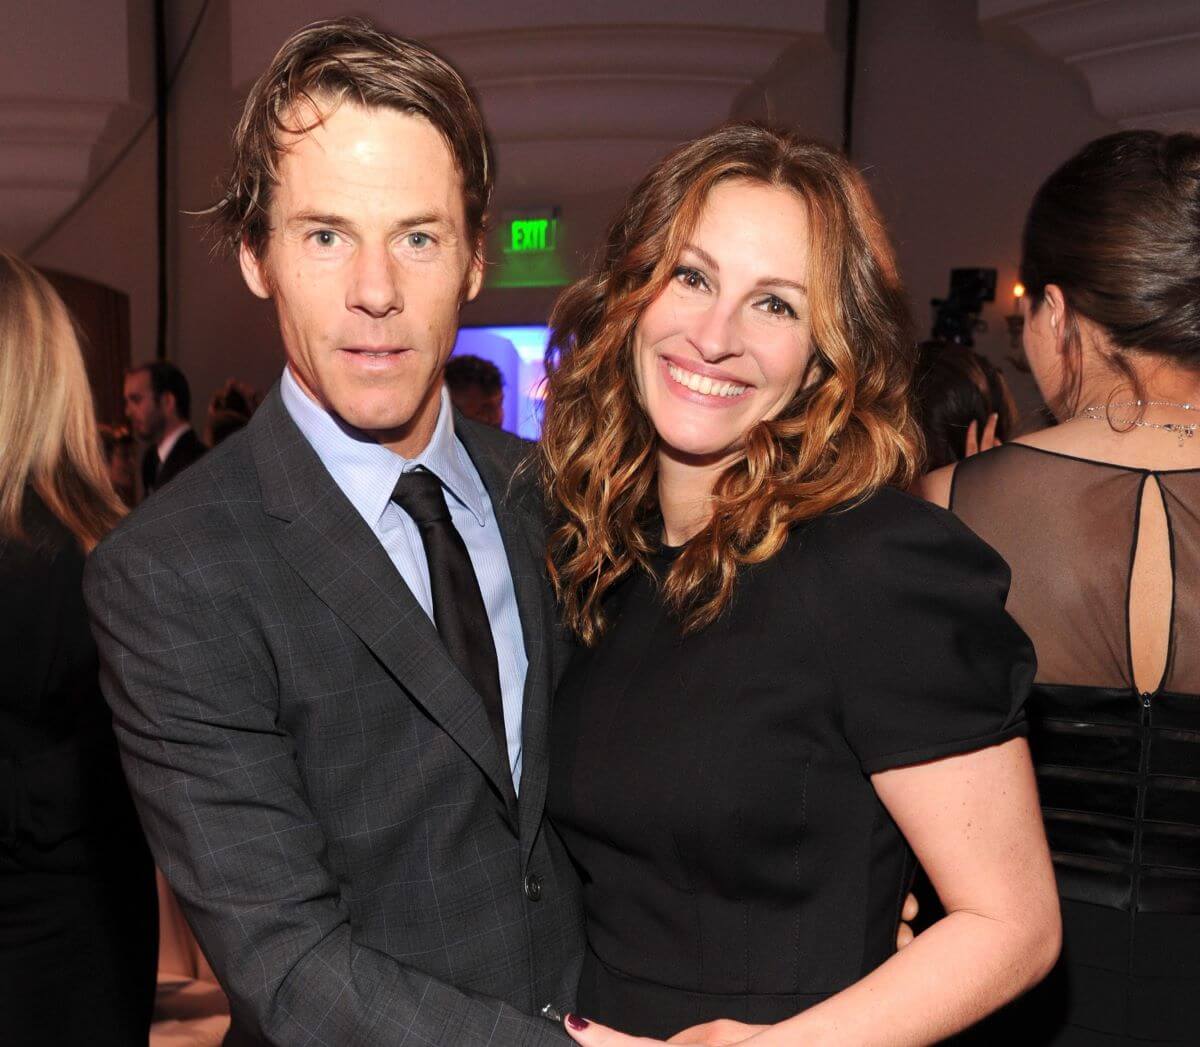 Danny Moder and Julia Roberts embrace in a crowded room.